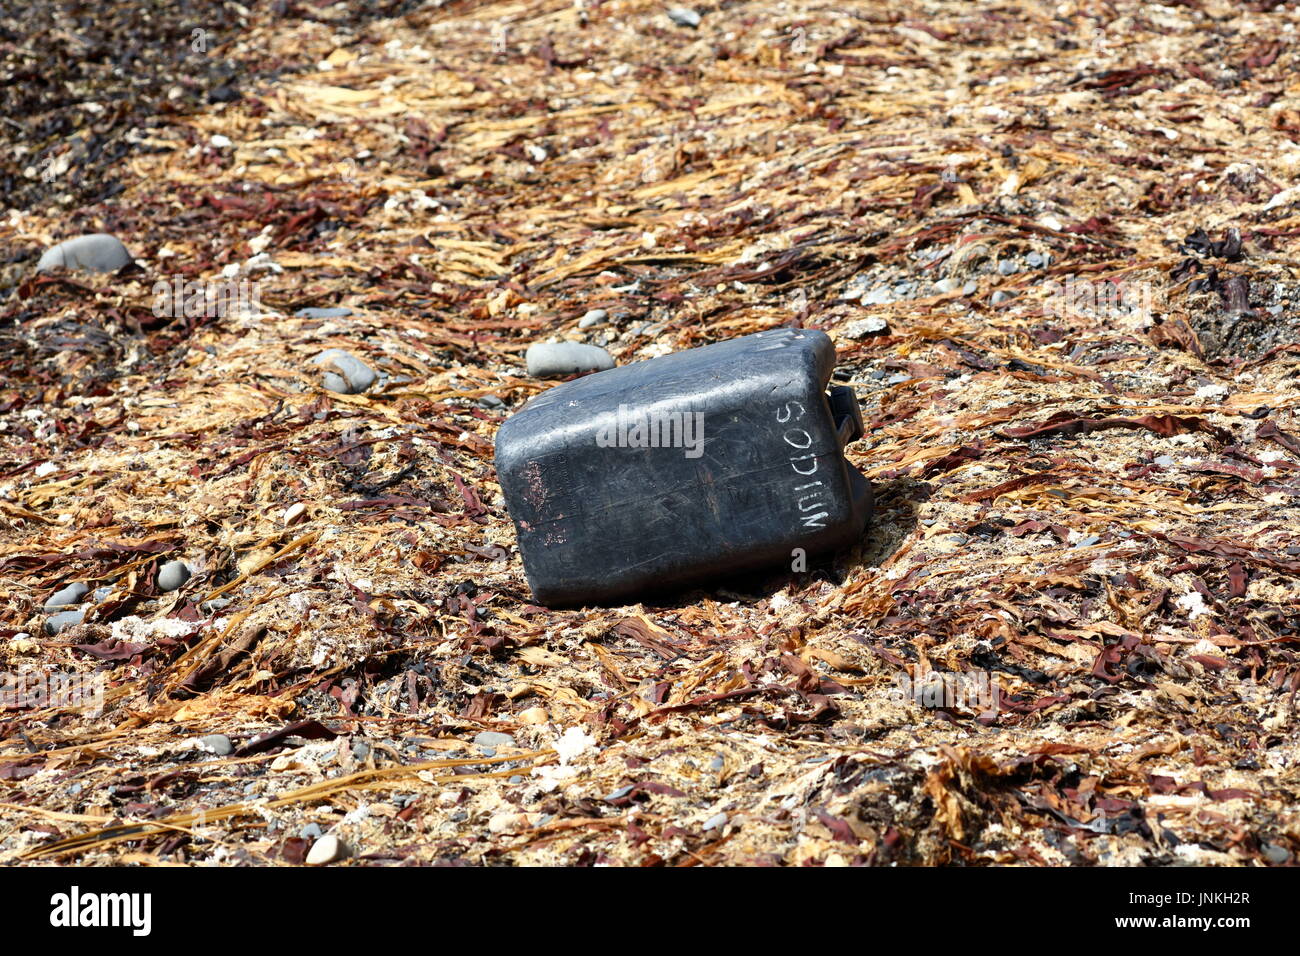 Download Plastic Container Amidst Kelp Seaweed And Shale Washed Up On Beach In Stock Photo Alamy Yellowimages Mockups